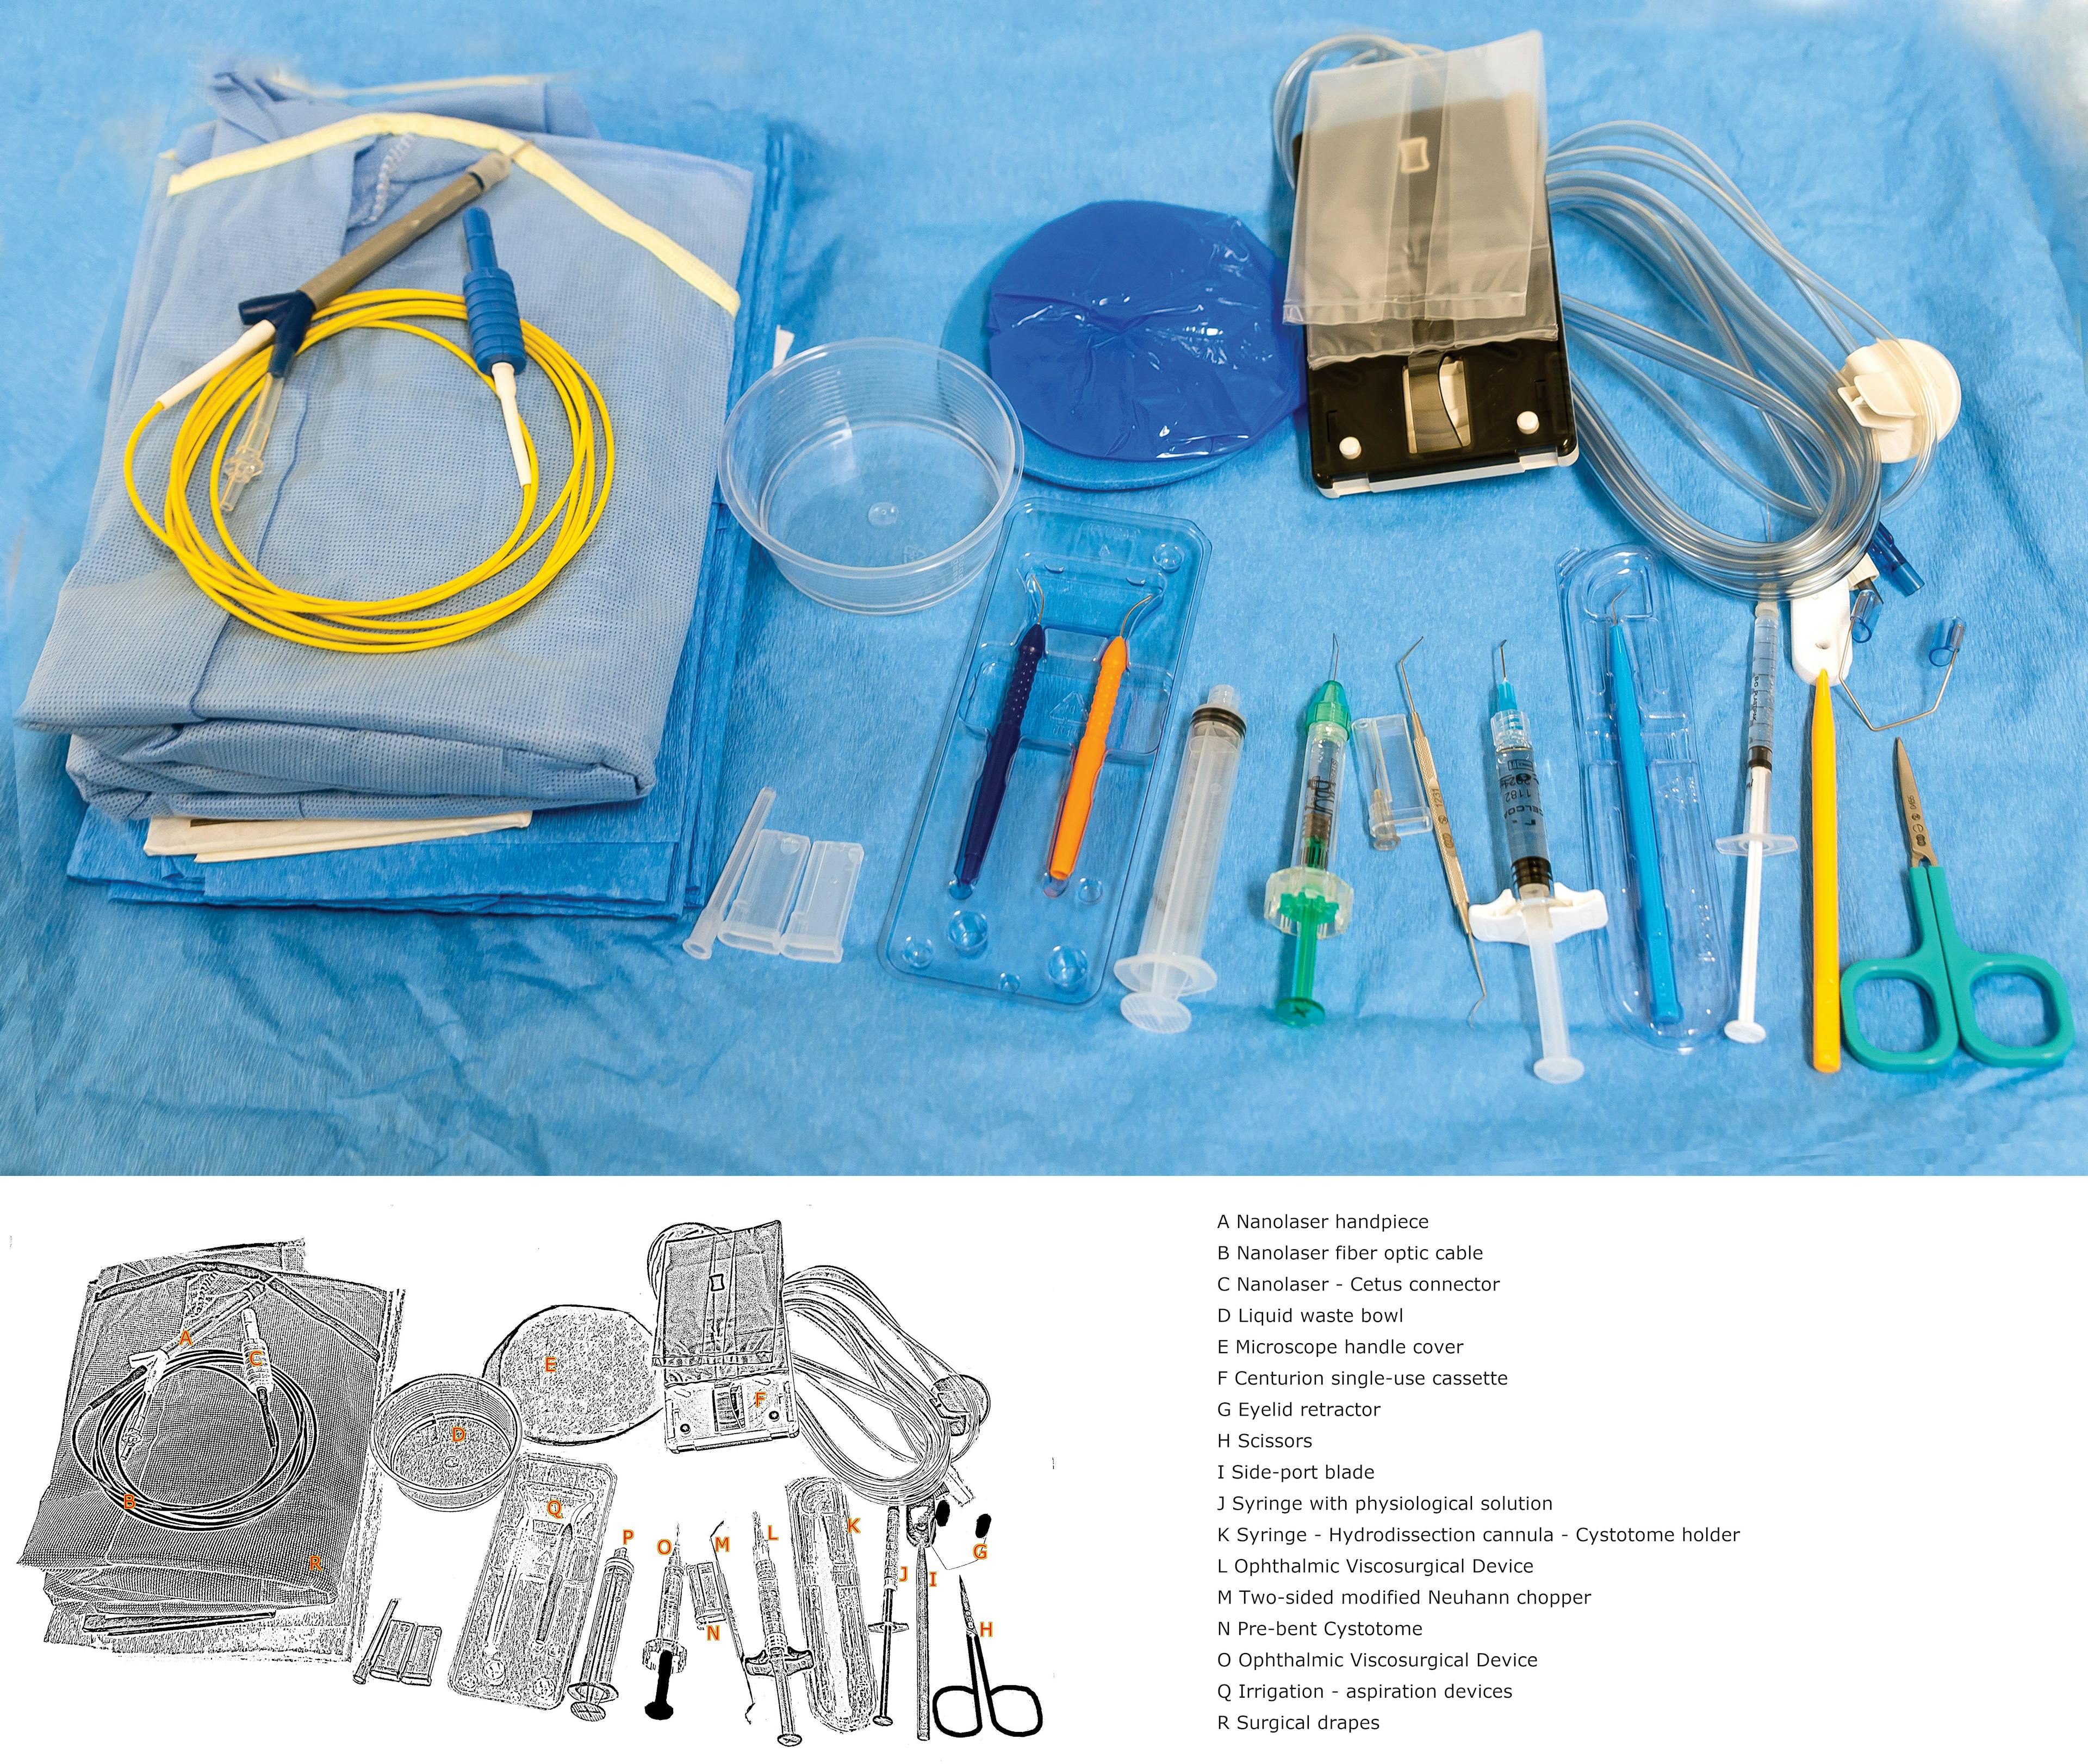 Single-use instrument tray used for nanosecond laser cataract surgery.